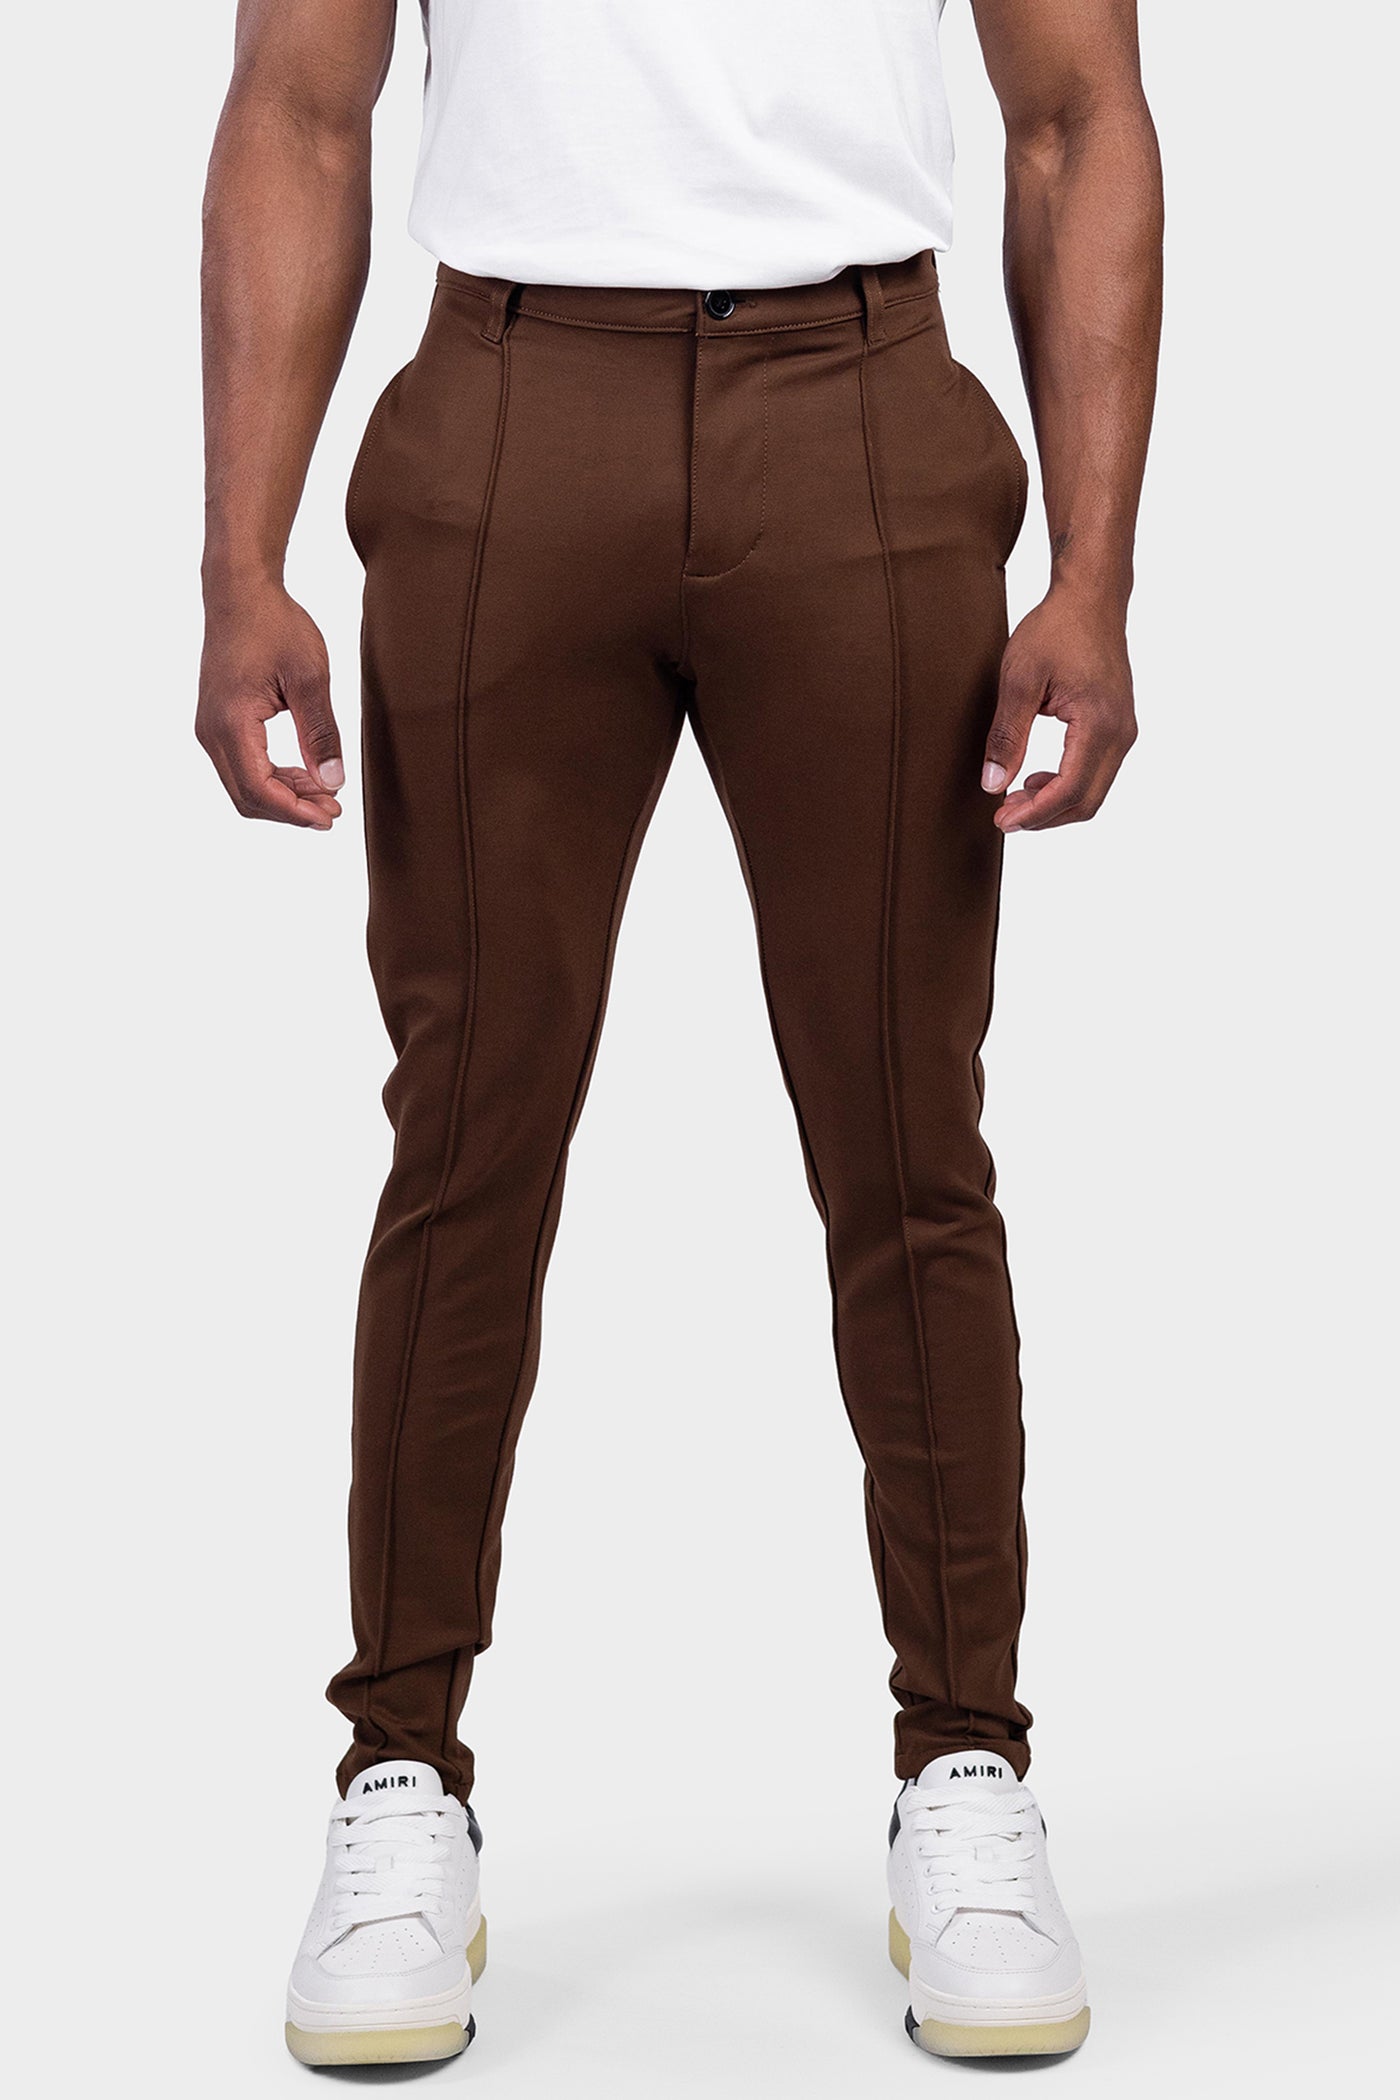 Men's Brown Pants | Best Black Pants | New chapter | icon amsterdam| mrmarvis |zalando trousers